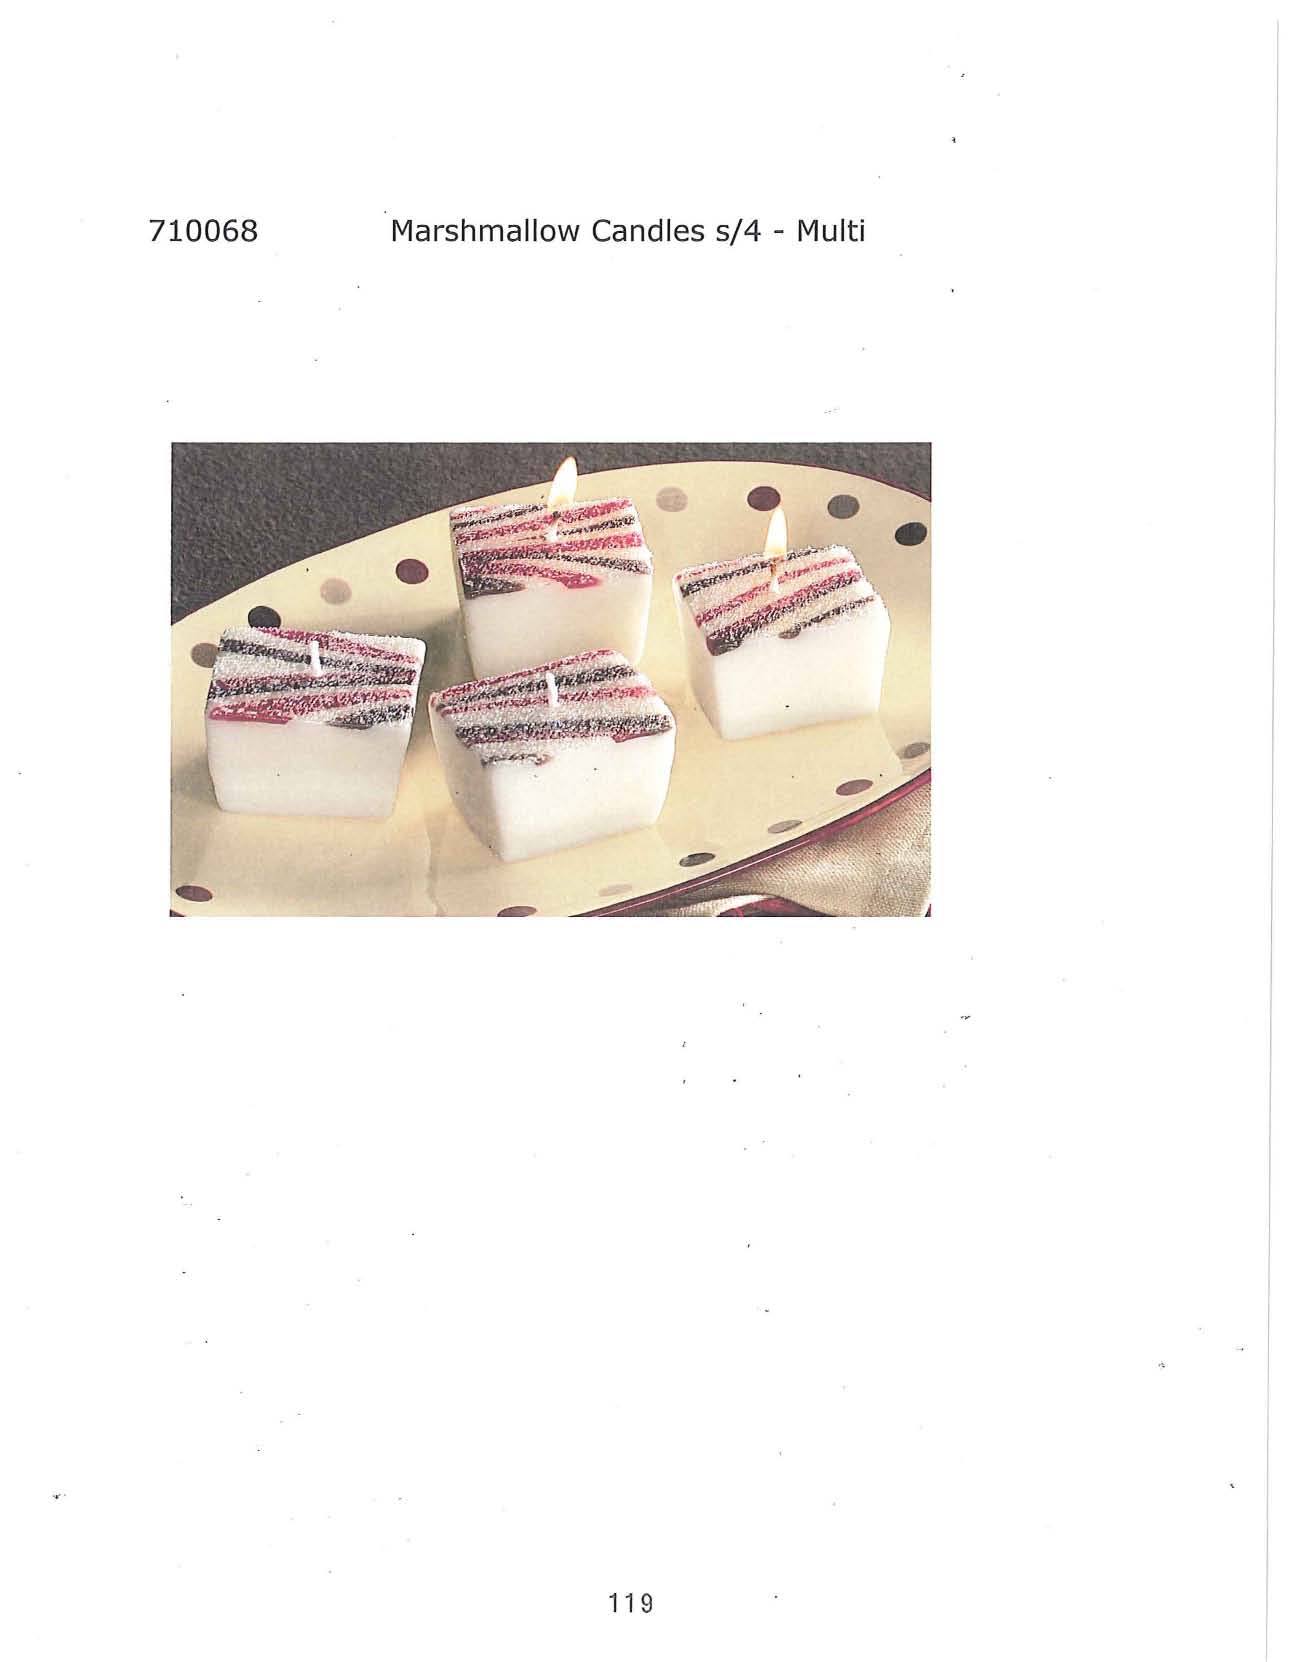 Marshmallow Candle s/4 - Multi